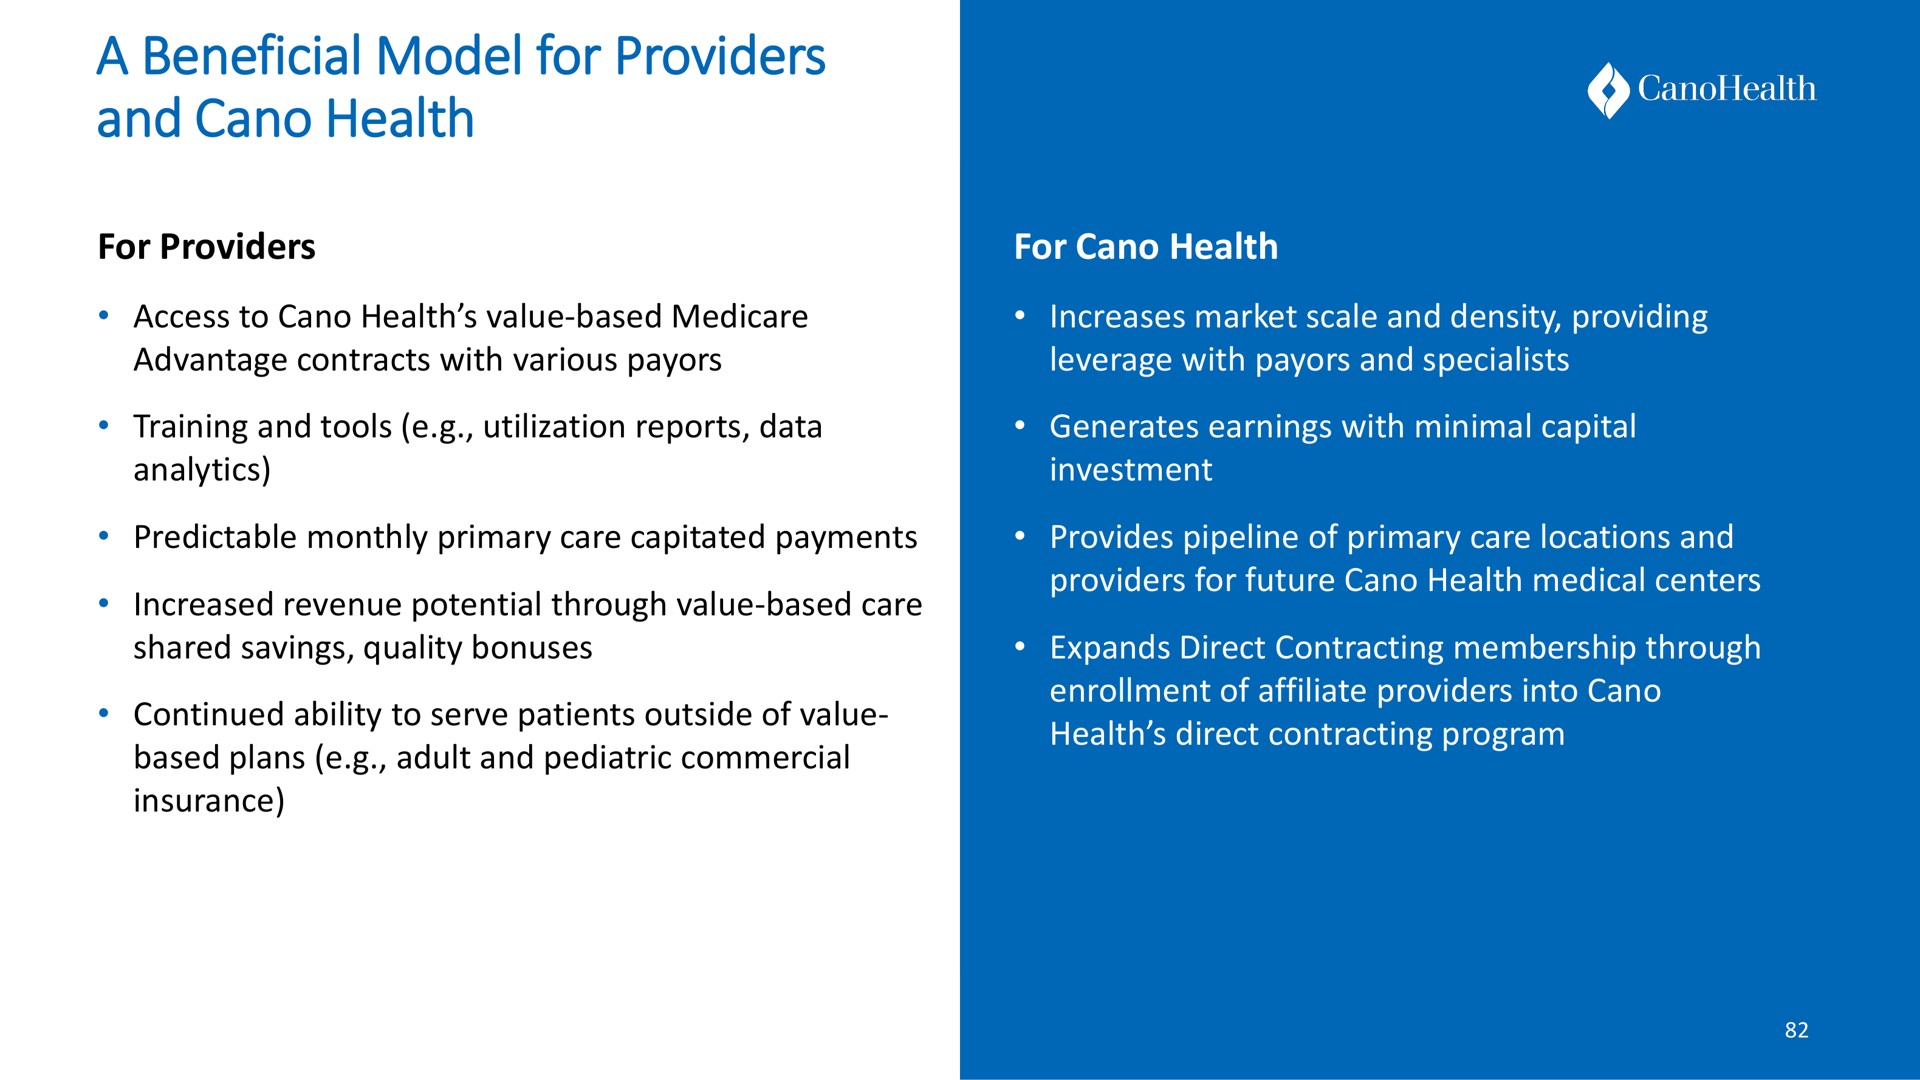 a beneficial model for providers and health | Cano Health